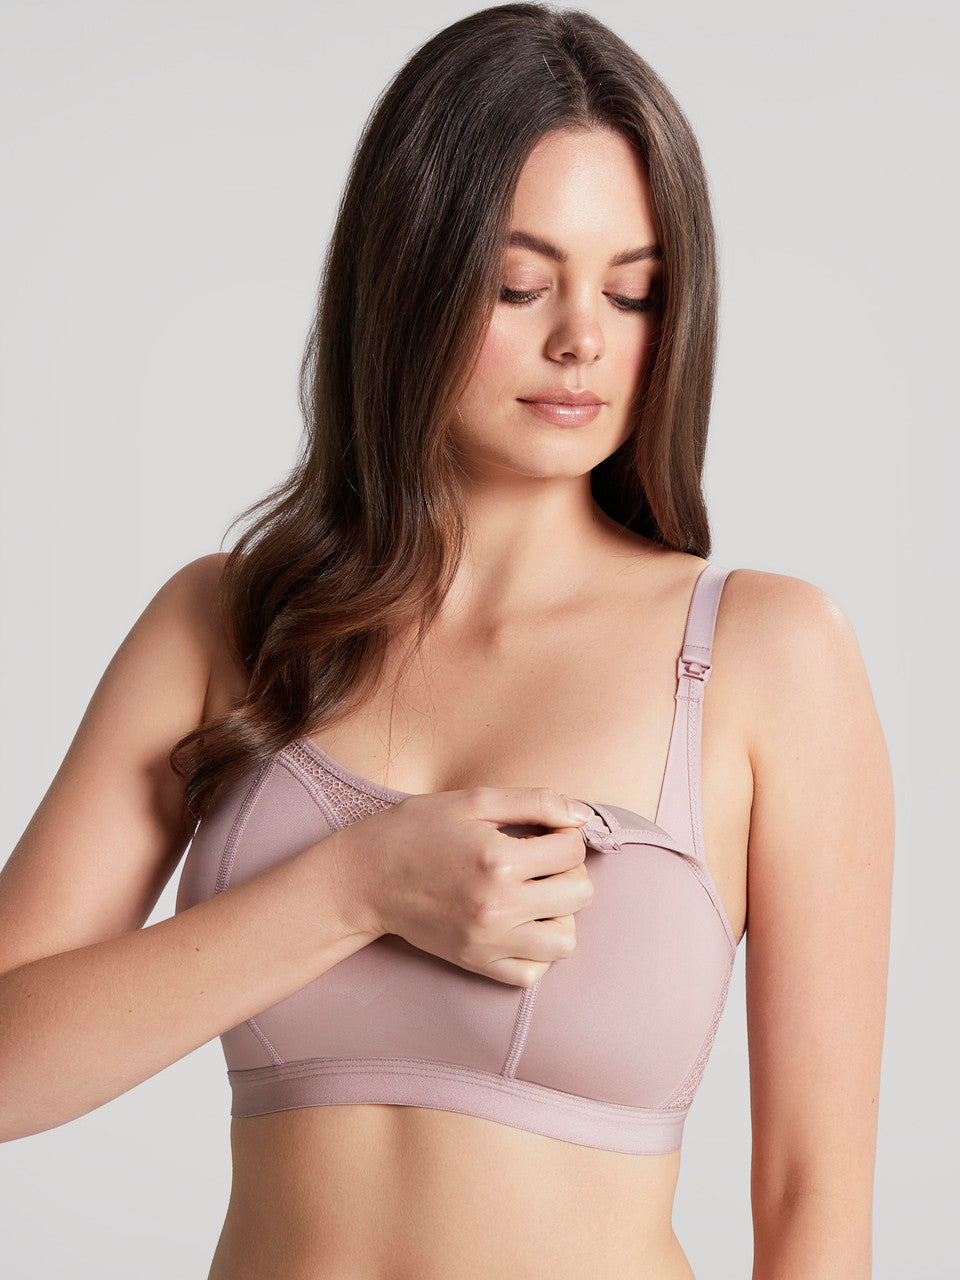 Carefix Post Op Bra Mary 3343 – Can-Care: Your Personalized Post